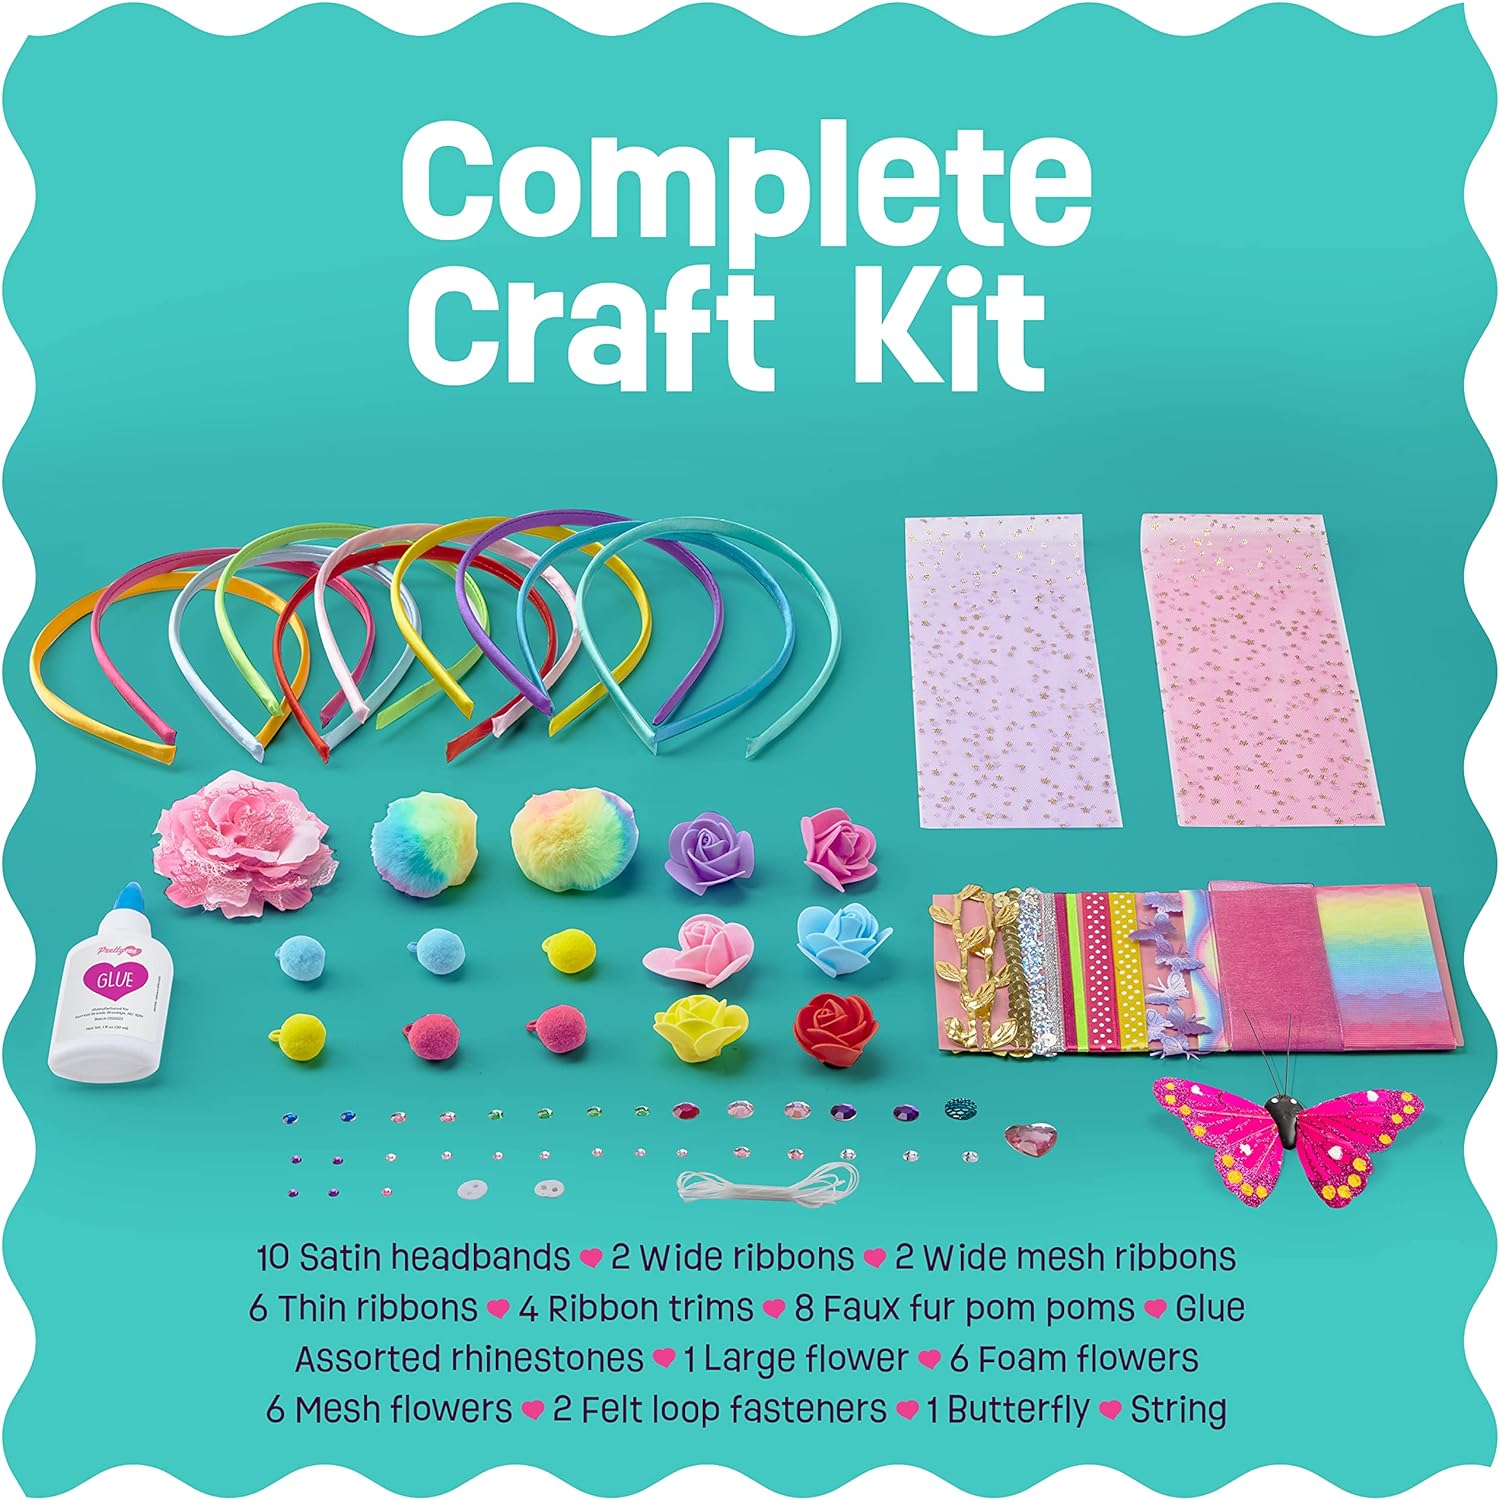 Pretty Me Headband Making Kit for Girls - Make Your Own Fashion Headbands for Kids - DIY Hair Accessories Set - Arts & Crafts Gift for Ages 5-12 Year Old Girl - Little Children's Art & Craft Gifts